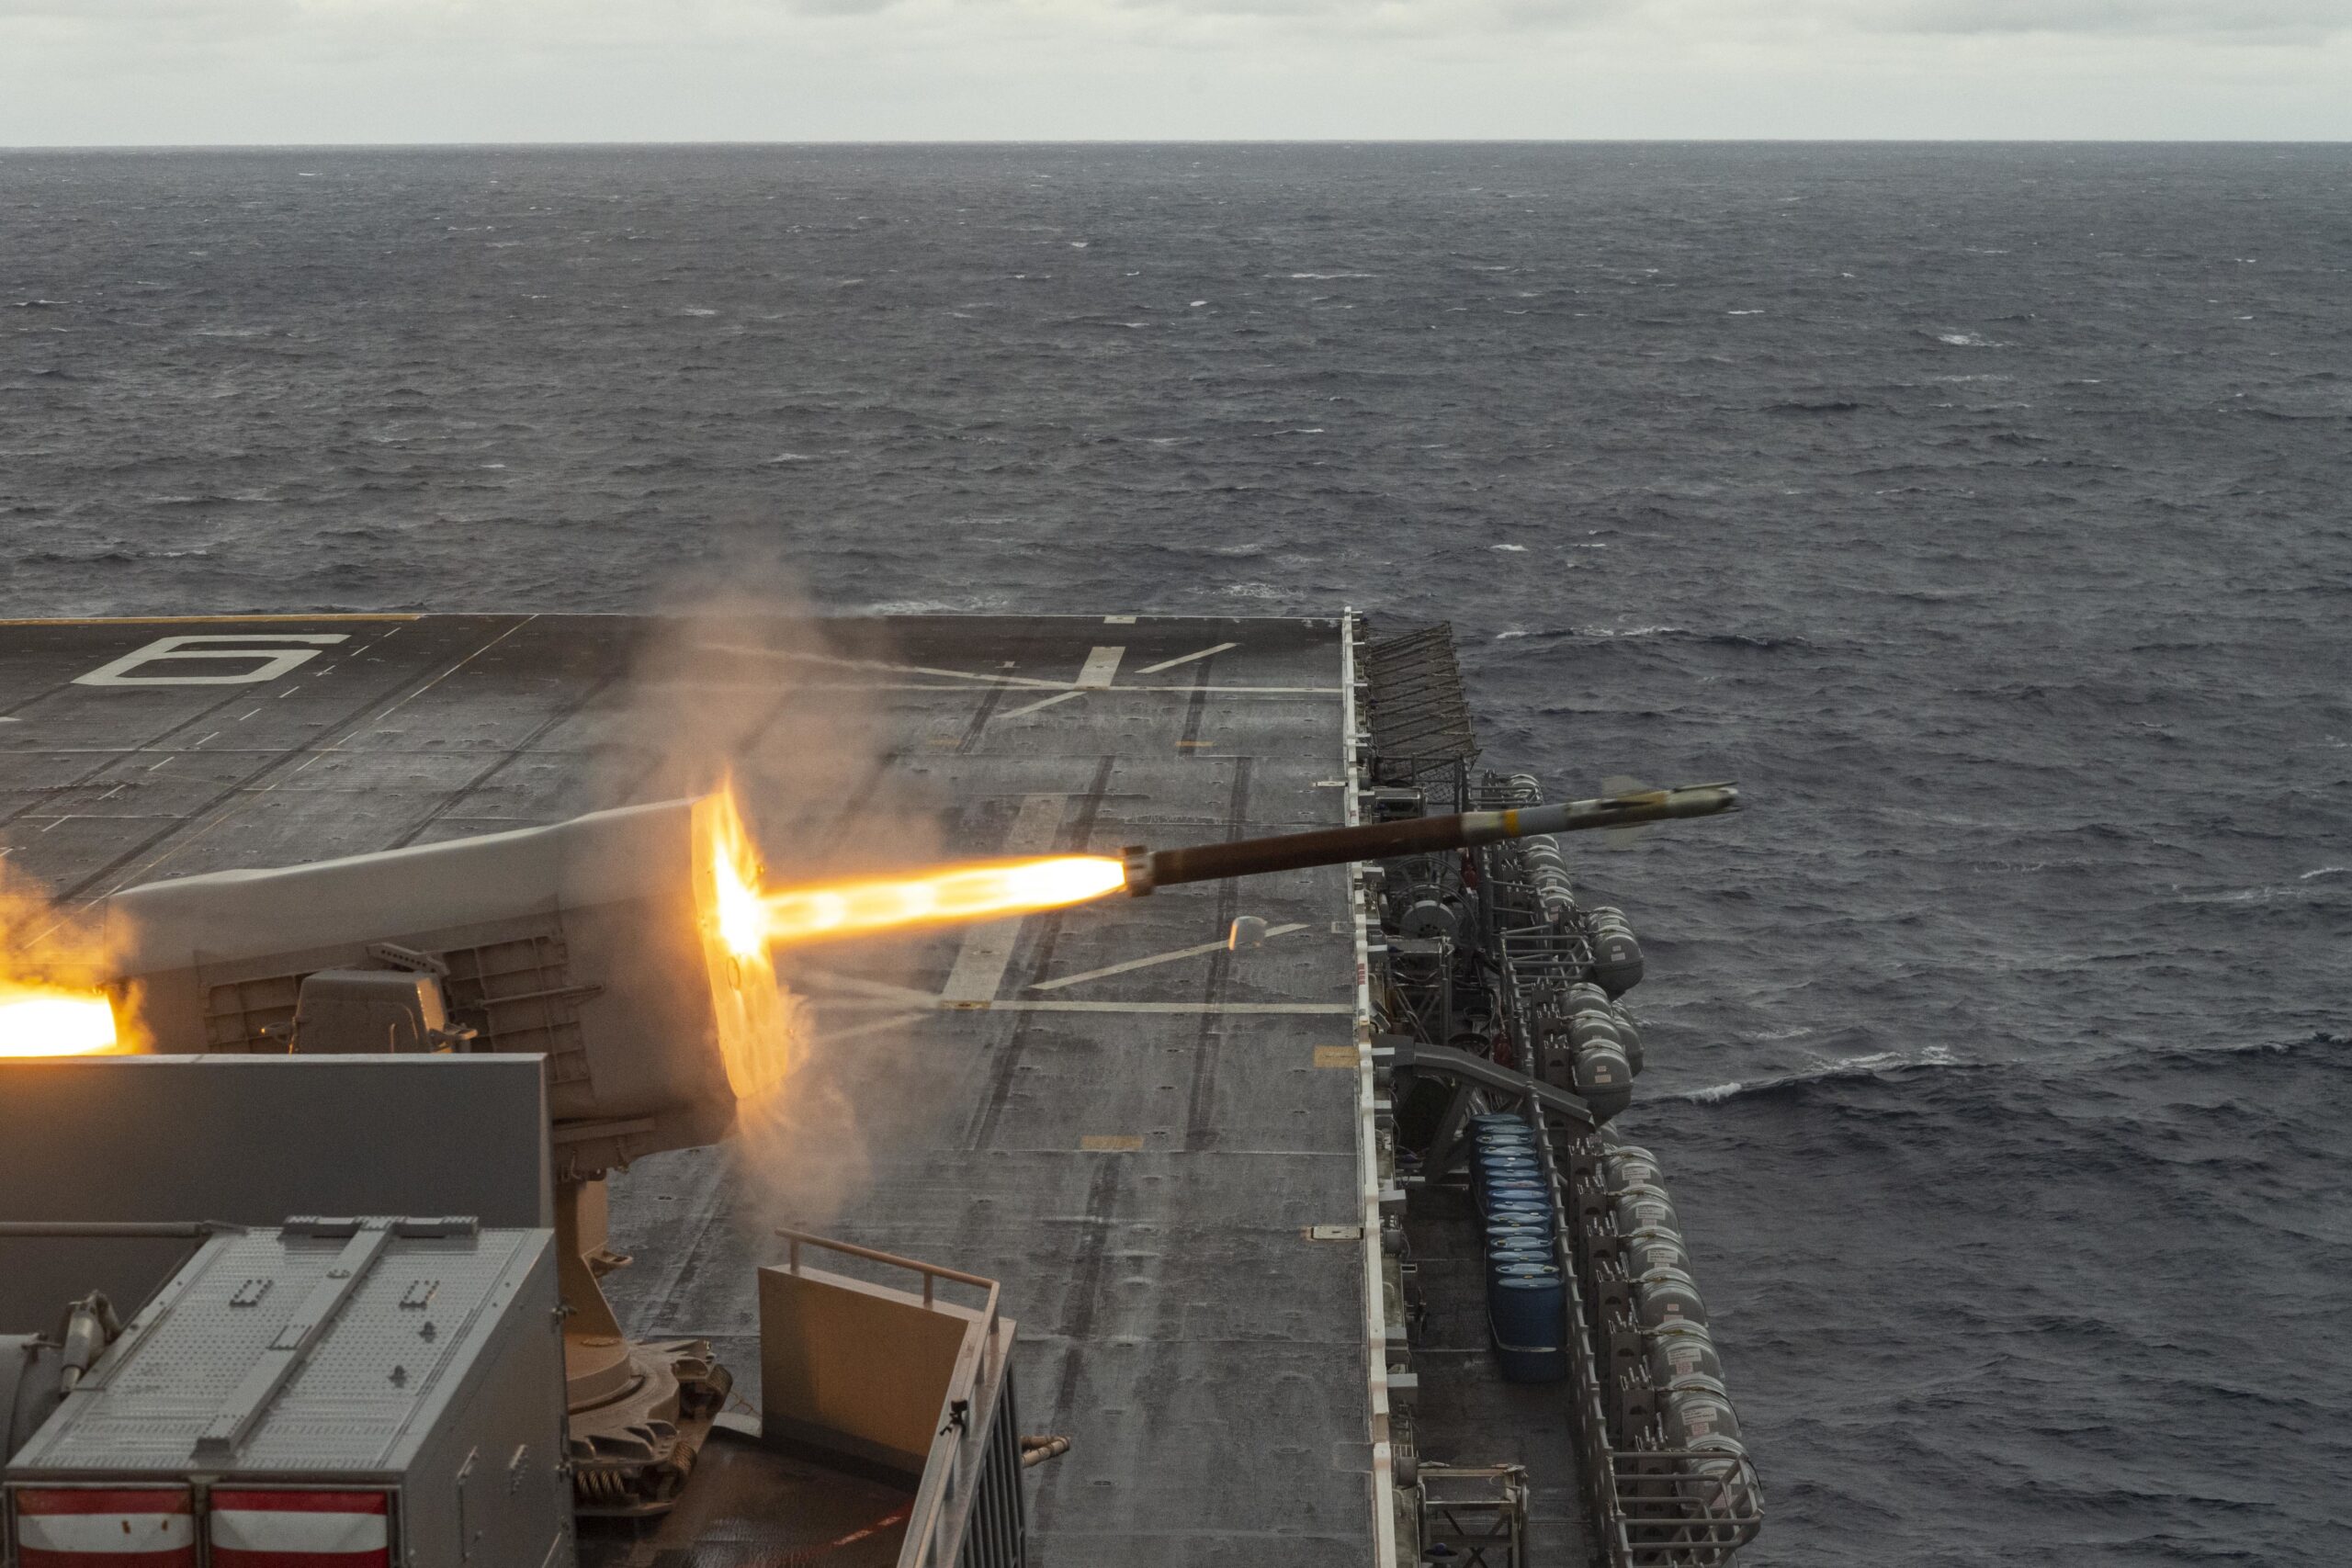 PHILIPPINE SEA (Jan. 24, 2023) The forward-deployed amphibious assault carrier, USS America (LHA 6), fires a RIM-116 Rolling Airframe Missile during routine operations while underway in the Philippine Sea, Jan. 24. America, lead ship of the America Amphibious Ready Group, is operating in the 7th Fleet area of operations. 7th Fleet is the U.S. Navy’s largest forward-deployed numbered fleet, and routinely interacts and operates with Allies and partners in preserving a free and open Indo-Pacific region. (Photo by Mass Communication Specialist 3rd Class Thomas B. Contant)